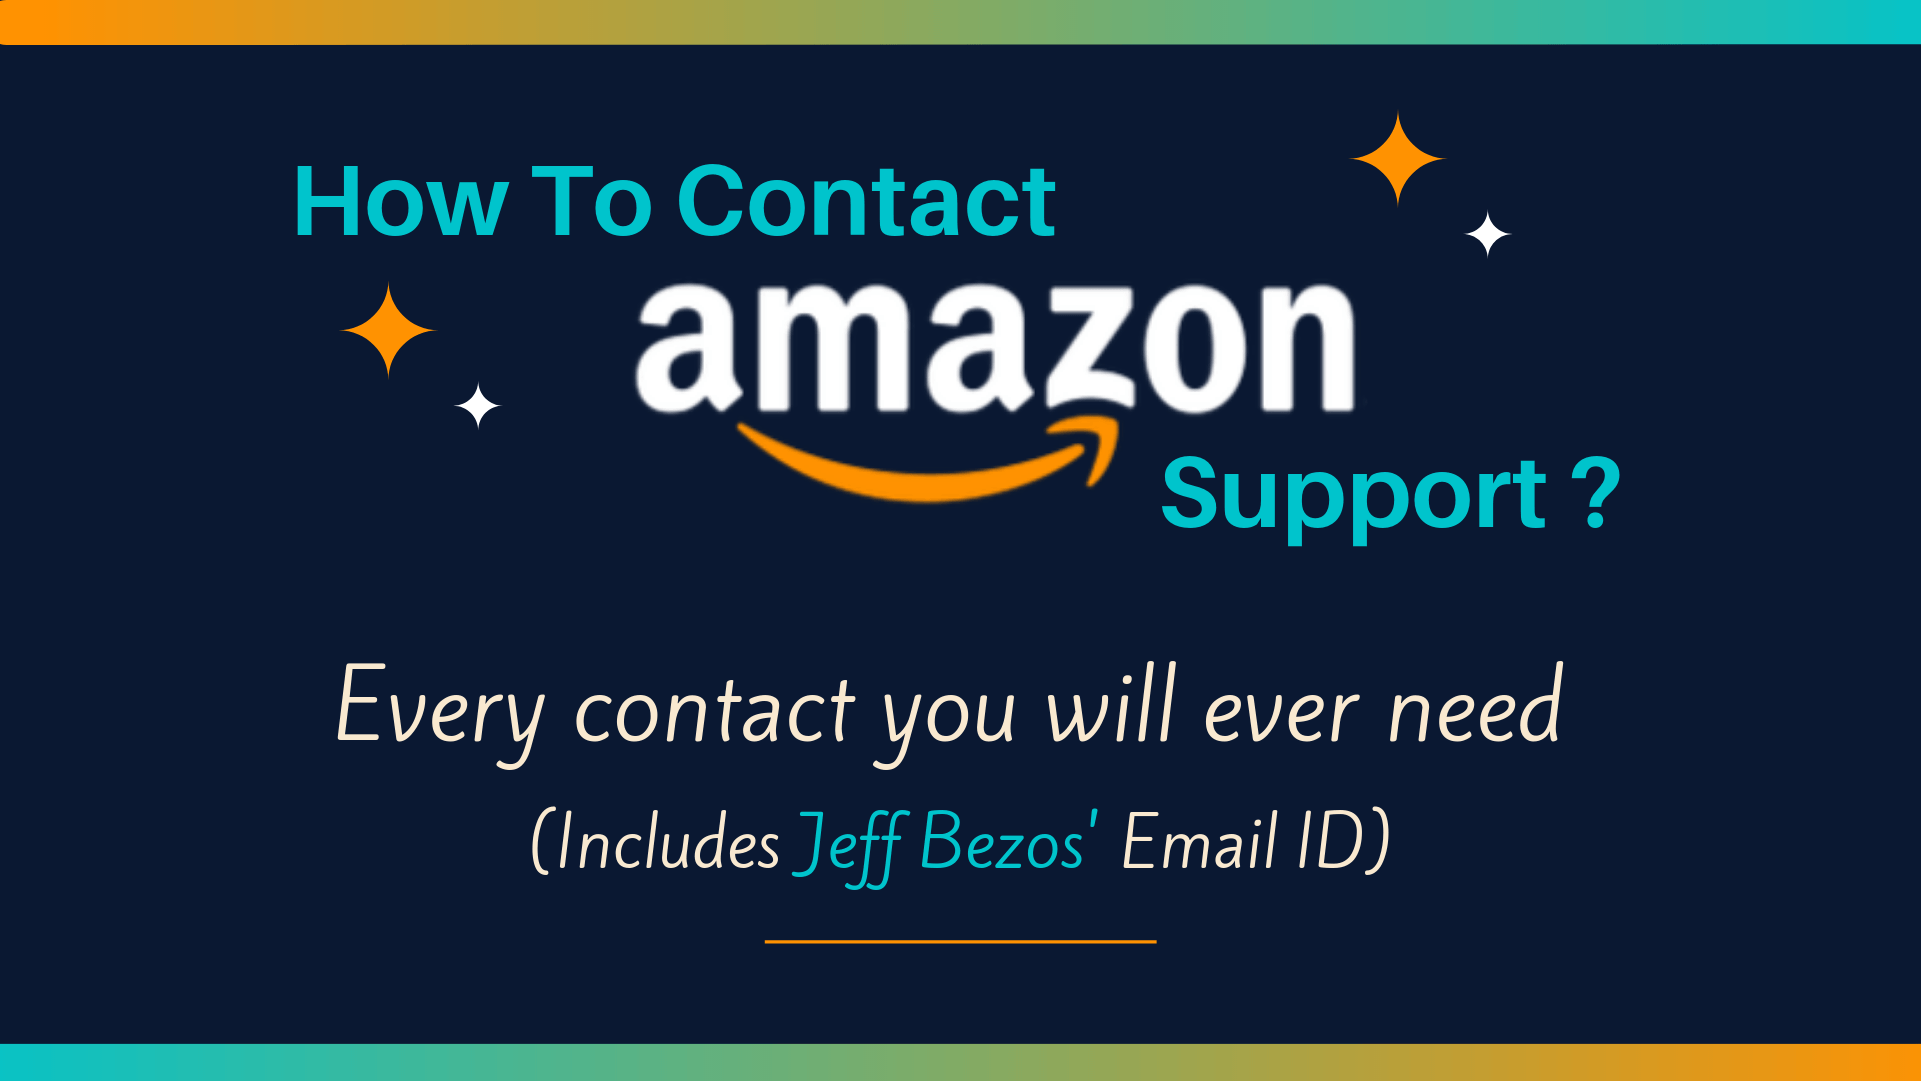 https://amazingmarketer.in/wp-content/uploads/2019/07/How-To-Contact-Amazon-Support.png